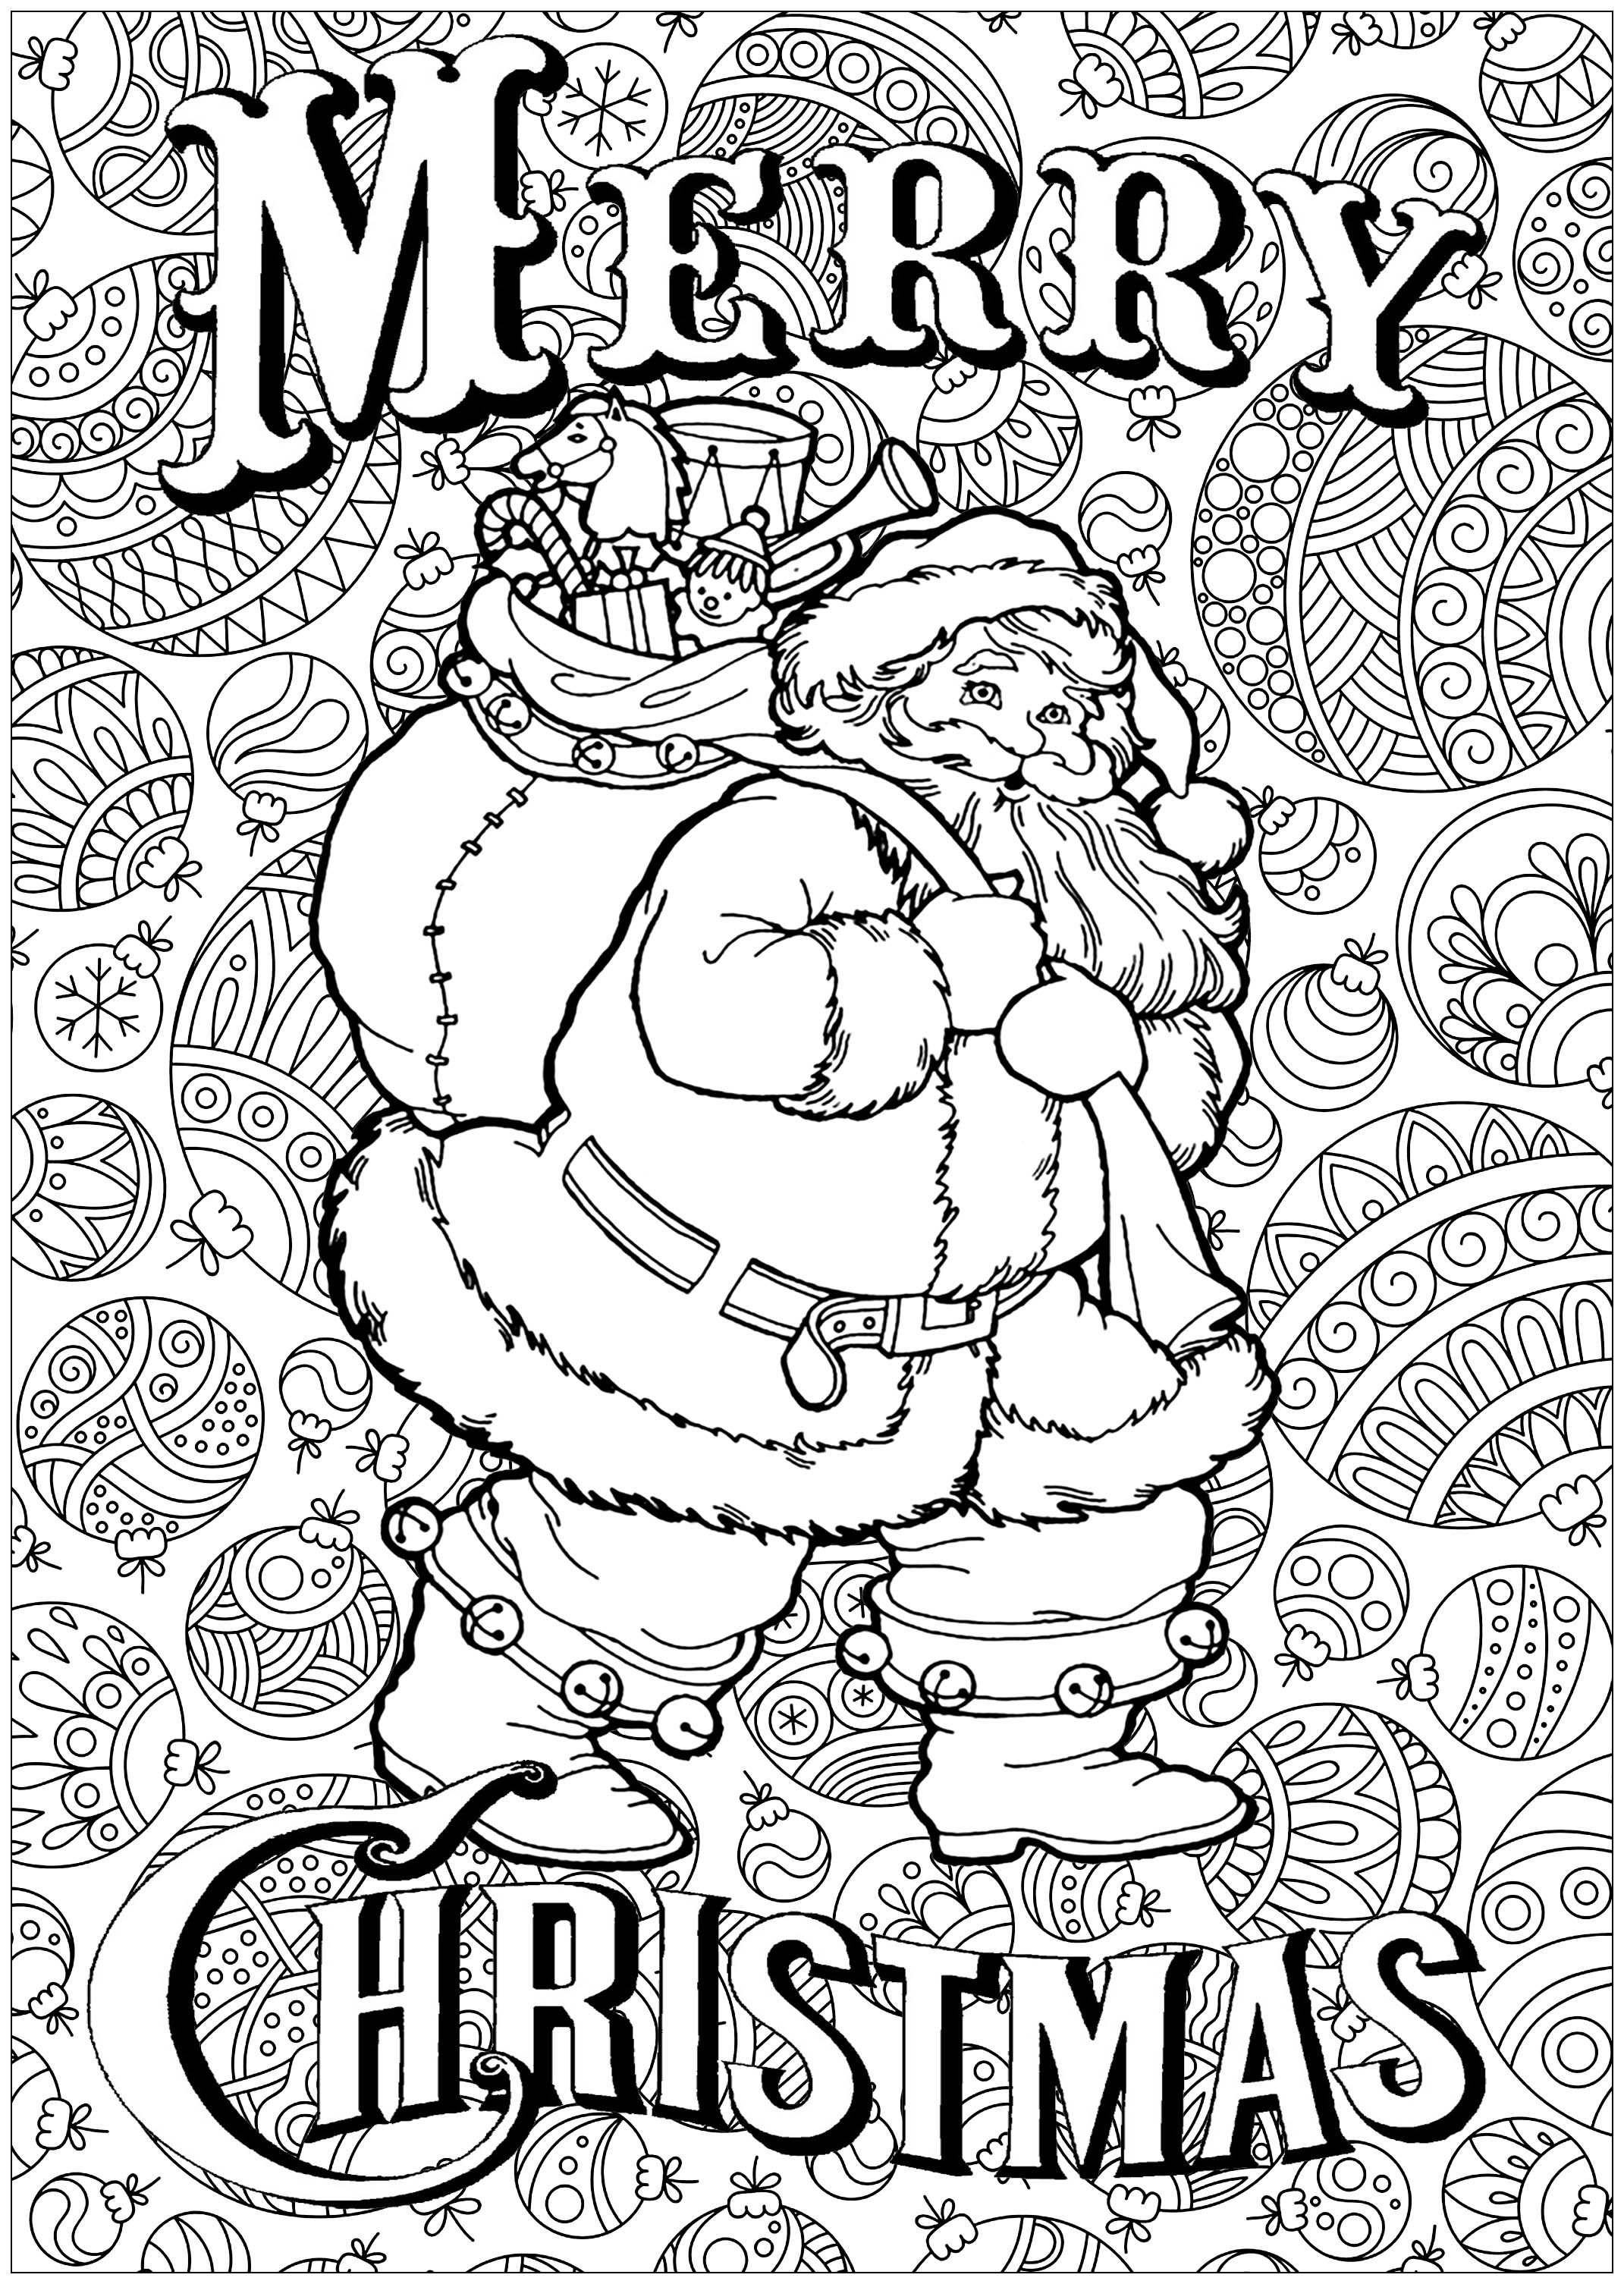 relaxing-holiday-coloring-pages-12-christmas-adult-coloring-pages